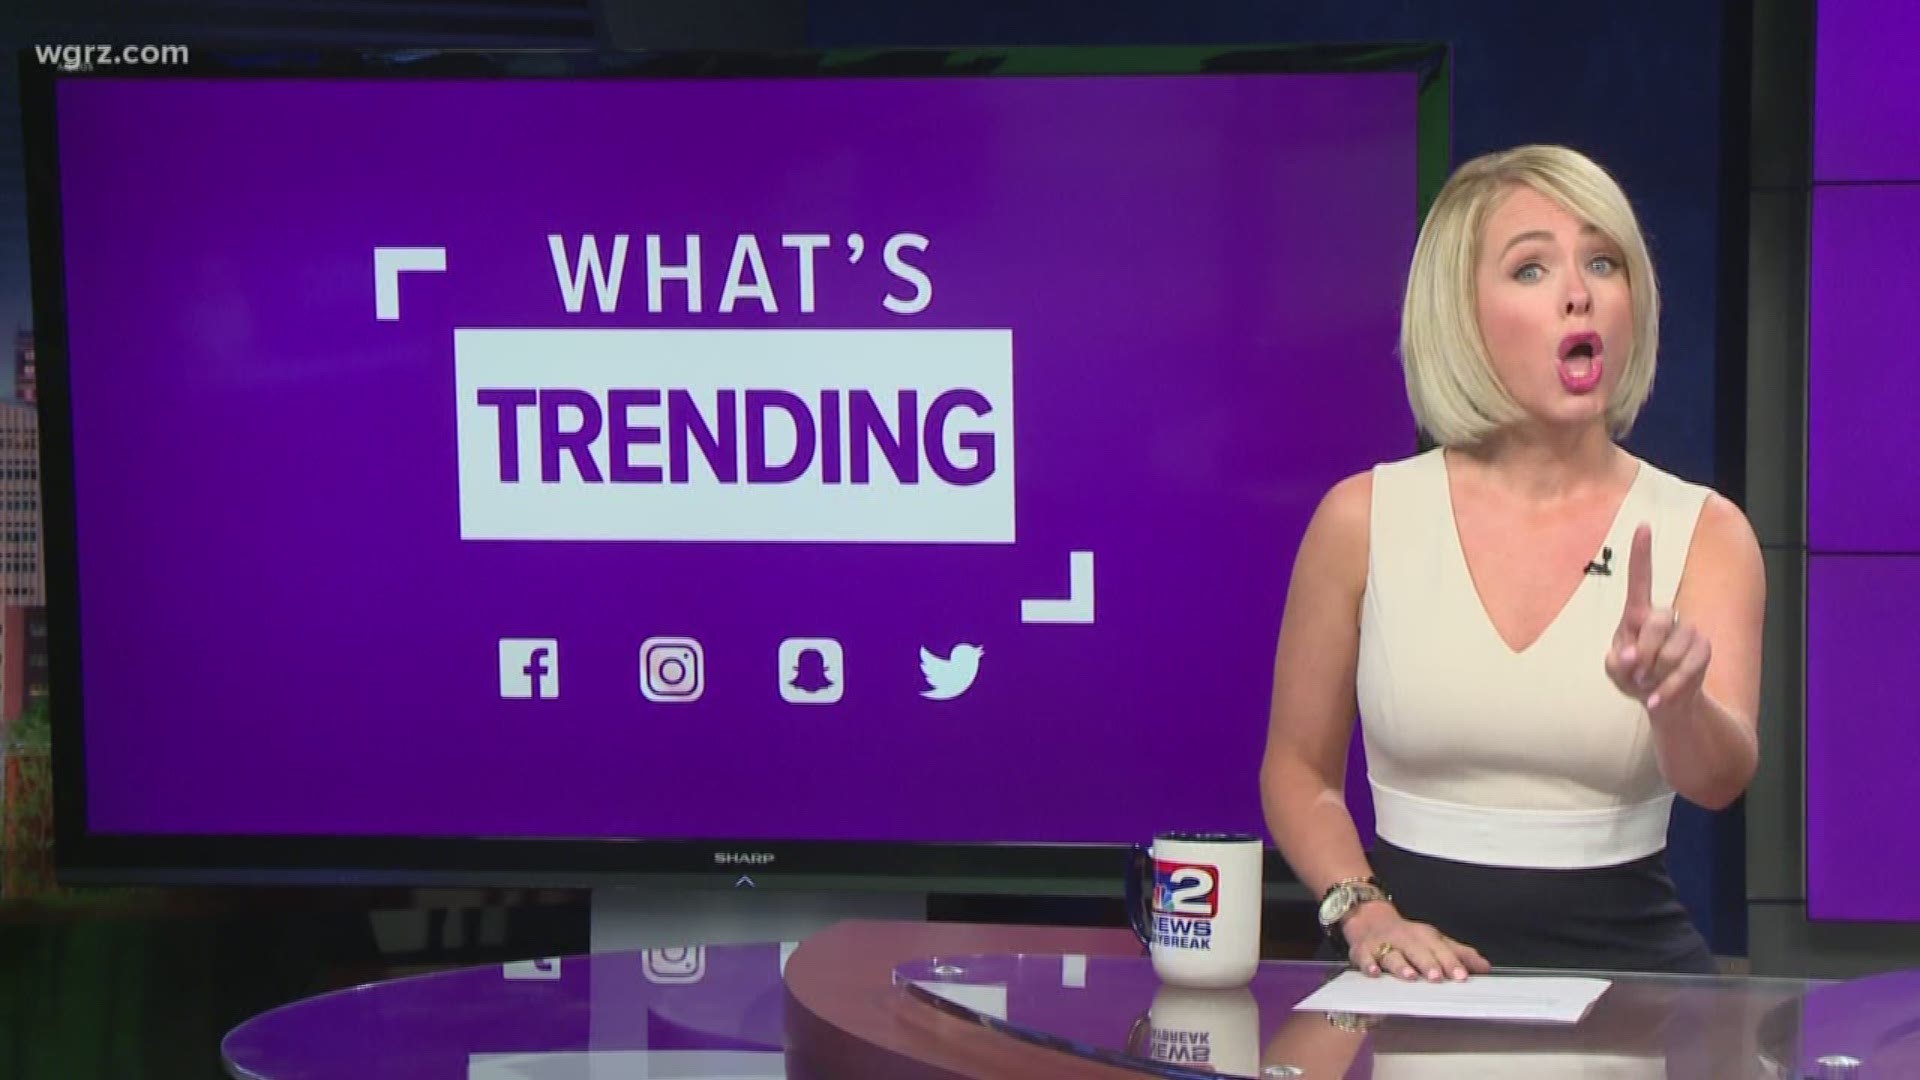 What a delightful collection of stories this morning on "What's Trending?" for Thursday, July 19, 2018.